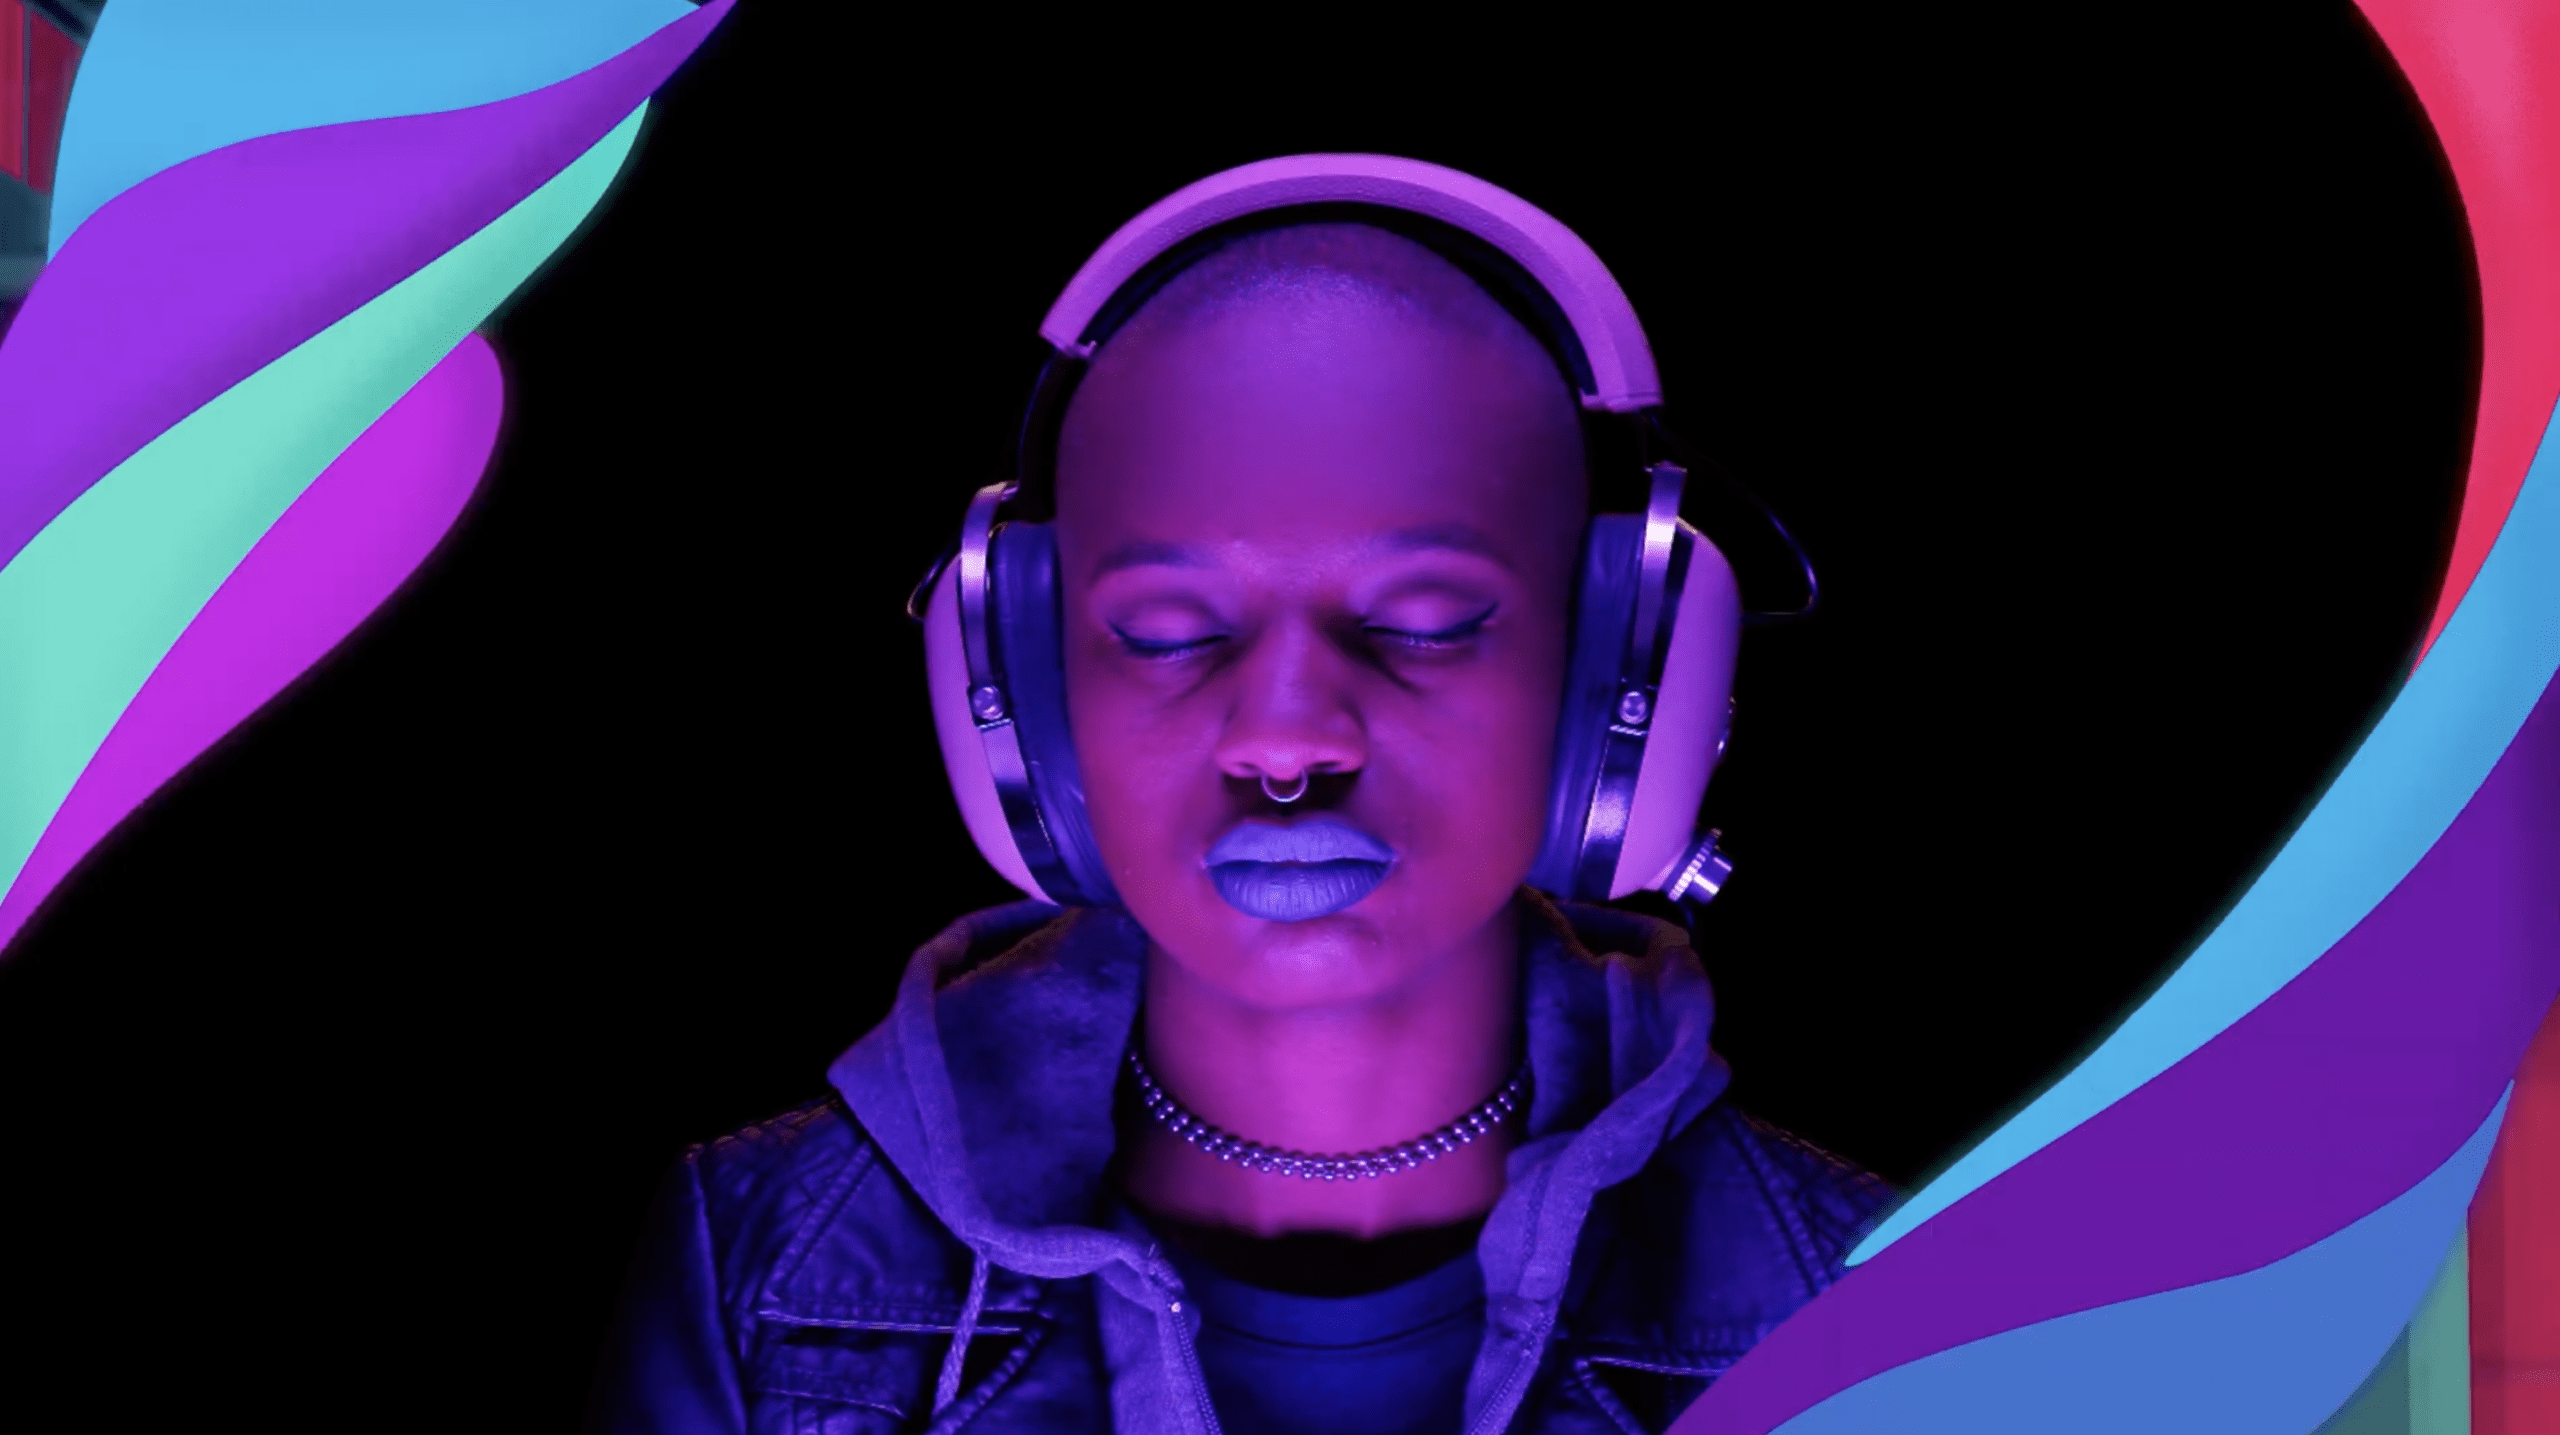 An advertisement that depicts a photo of a woman from the shoulders up against a black background, lit with purple lighting. The woman has her eyes closed and is wearing headphones, a jean jacket over a sweatshirt, bold blue lipstick, and winged eyeliner. She is framed by abstract green, pink, purple, blue, and red swirls.